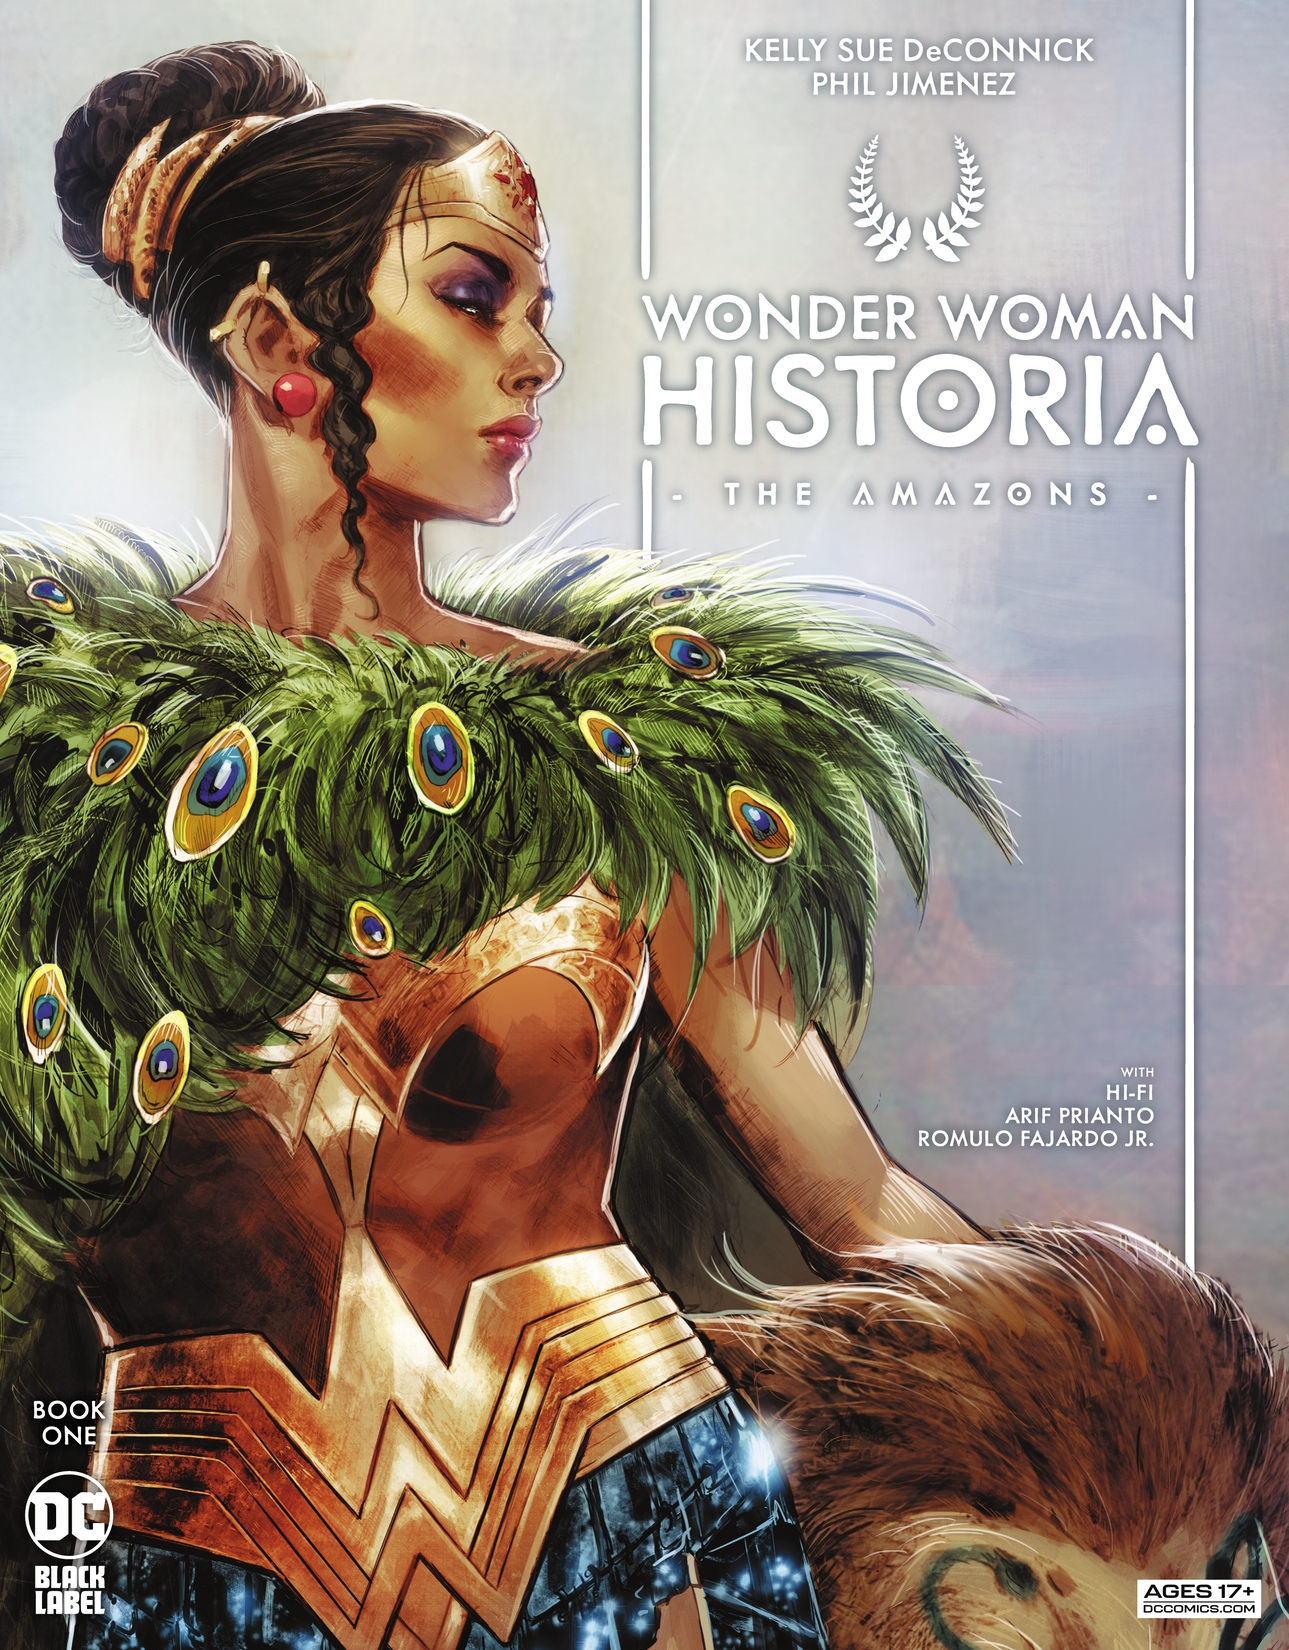 Wonder Woman Historia: The Amazons #1 preview images